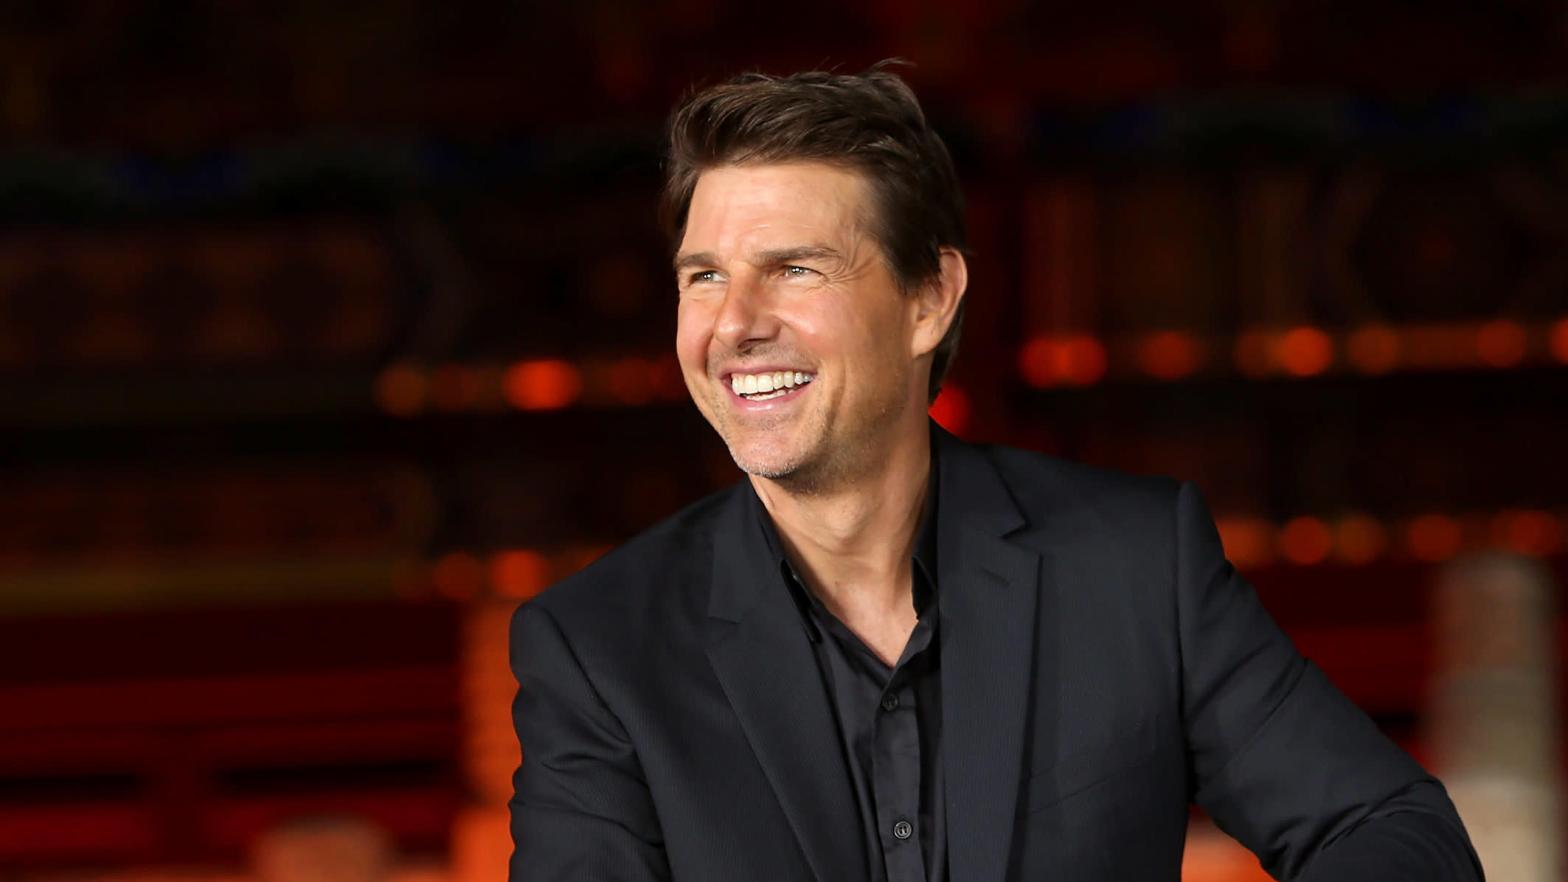 Actual Tom Cruise, for comparison (Photo: Emmanuel Wong/Getty Images for Paramount Pictures, Getty Images)